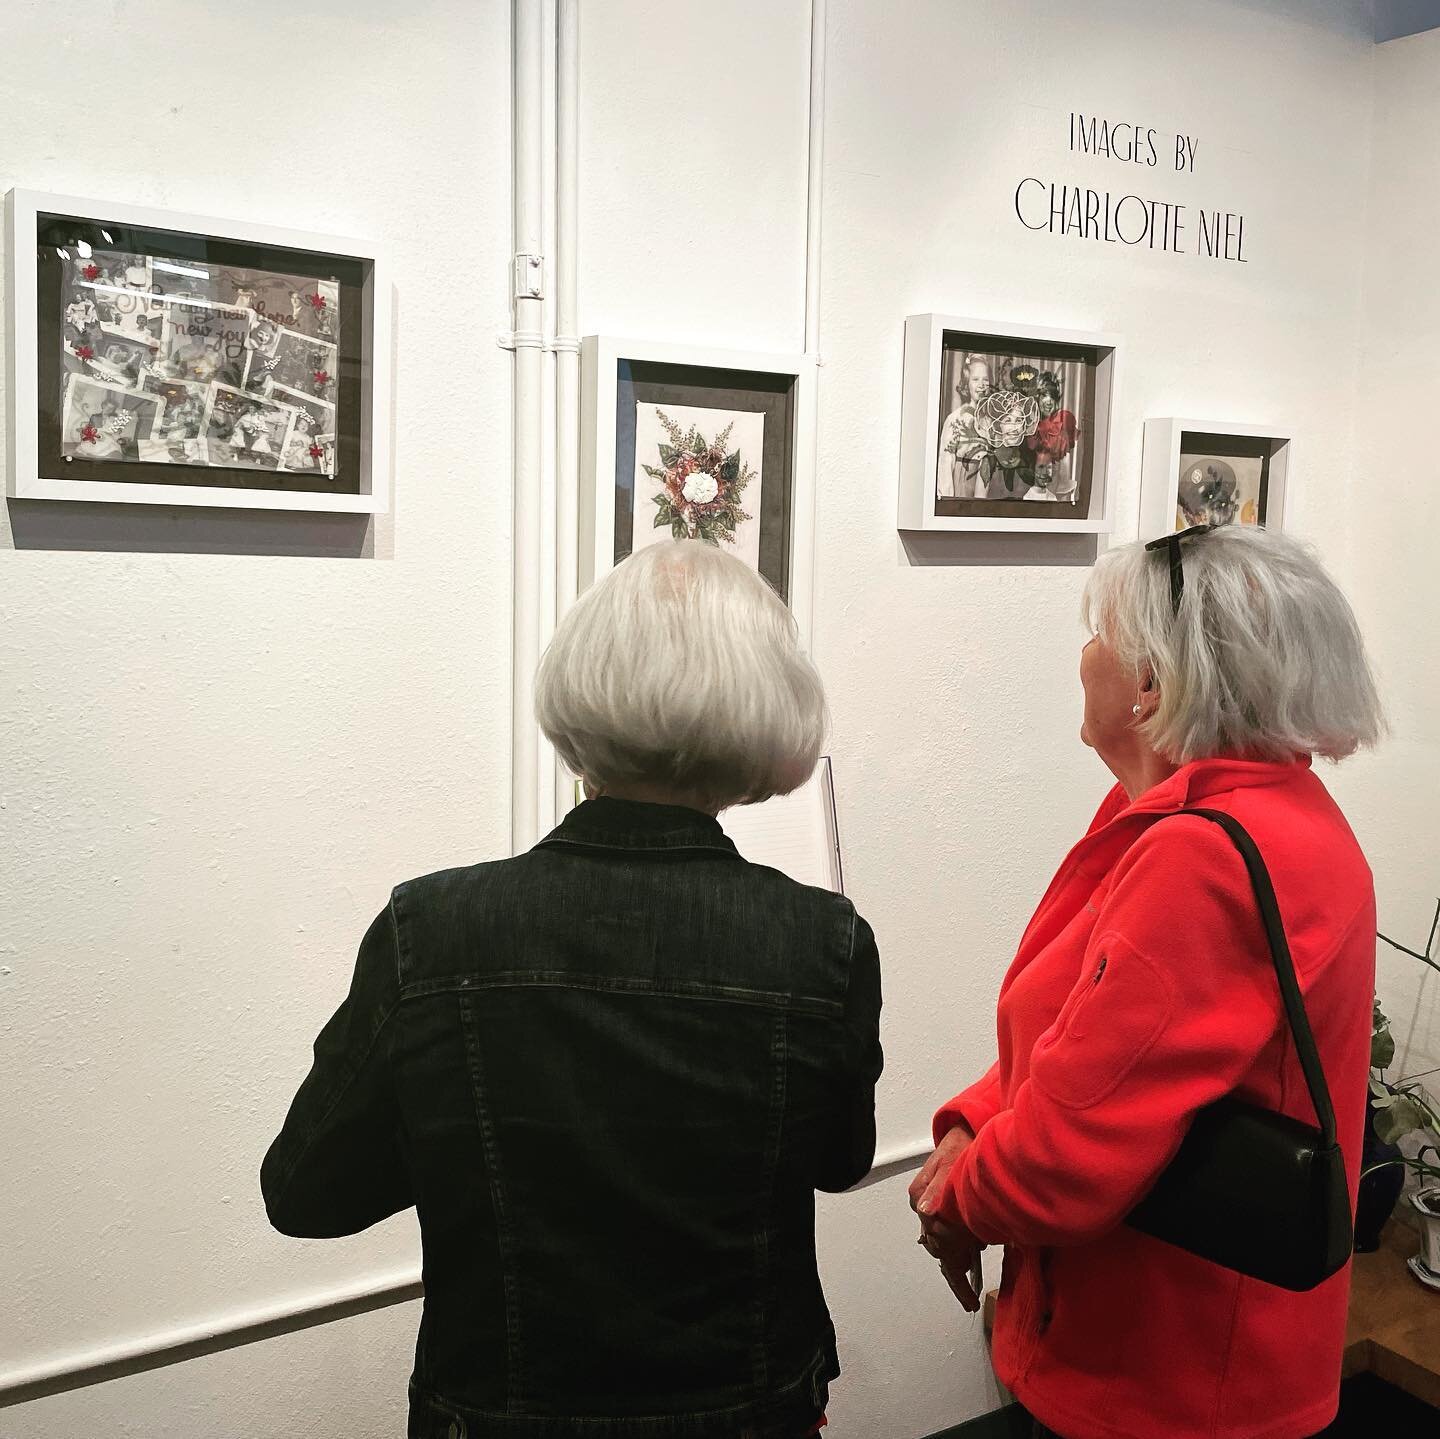 Thanks to all who came out to the closing reception for Charlotte Niel&rsquo;s show &ldquo;Forget me Not&rdquo;, twas a blast to see old friends and meet new people amongst a plethora of great art.

For continued updates on Charlotte&rsquo;s work che